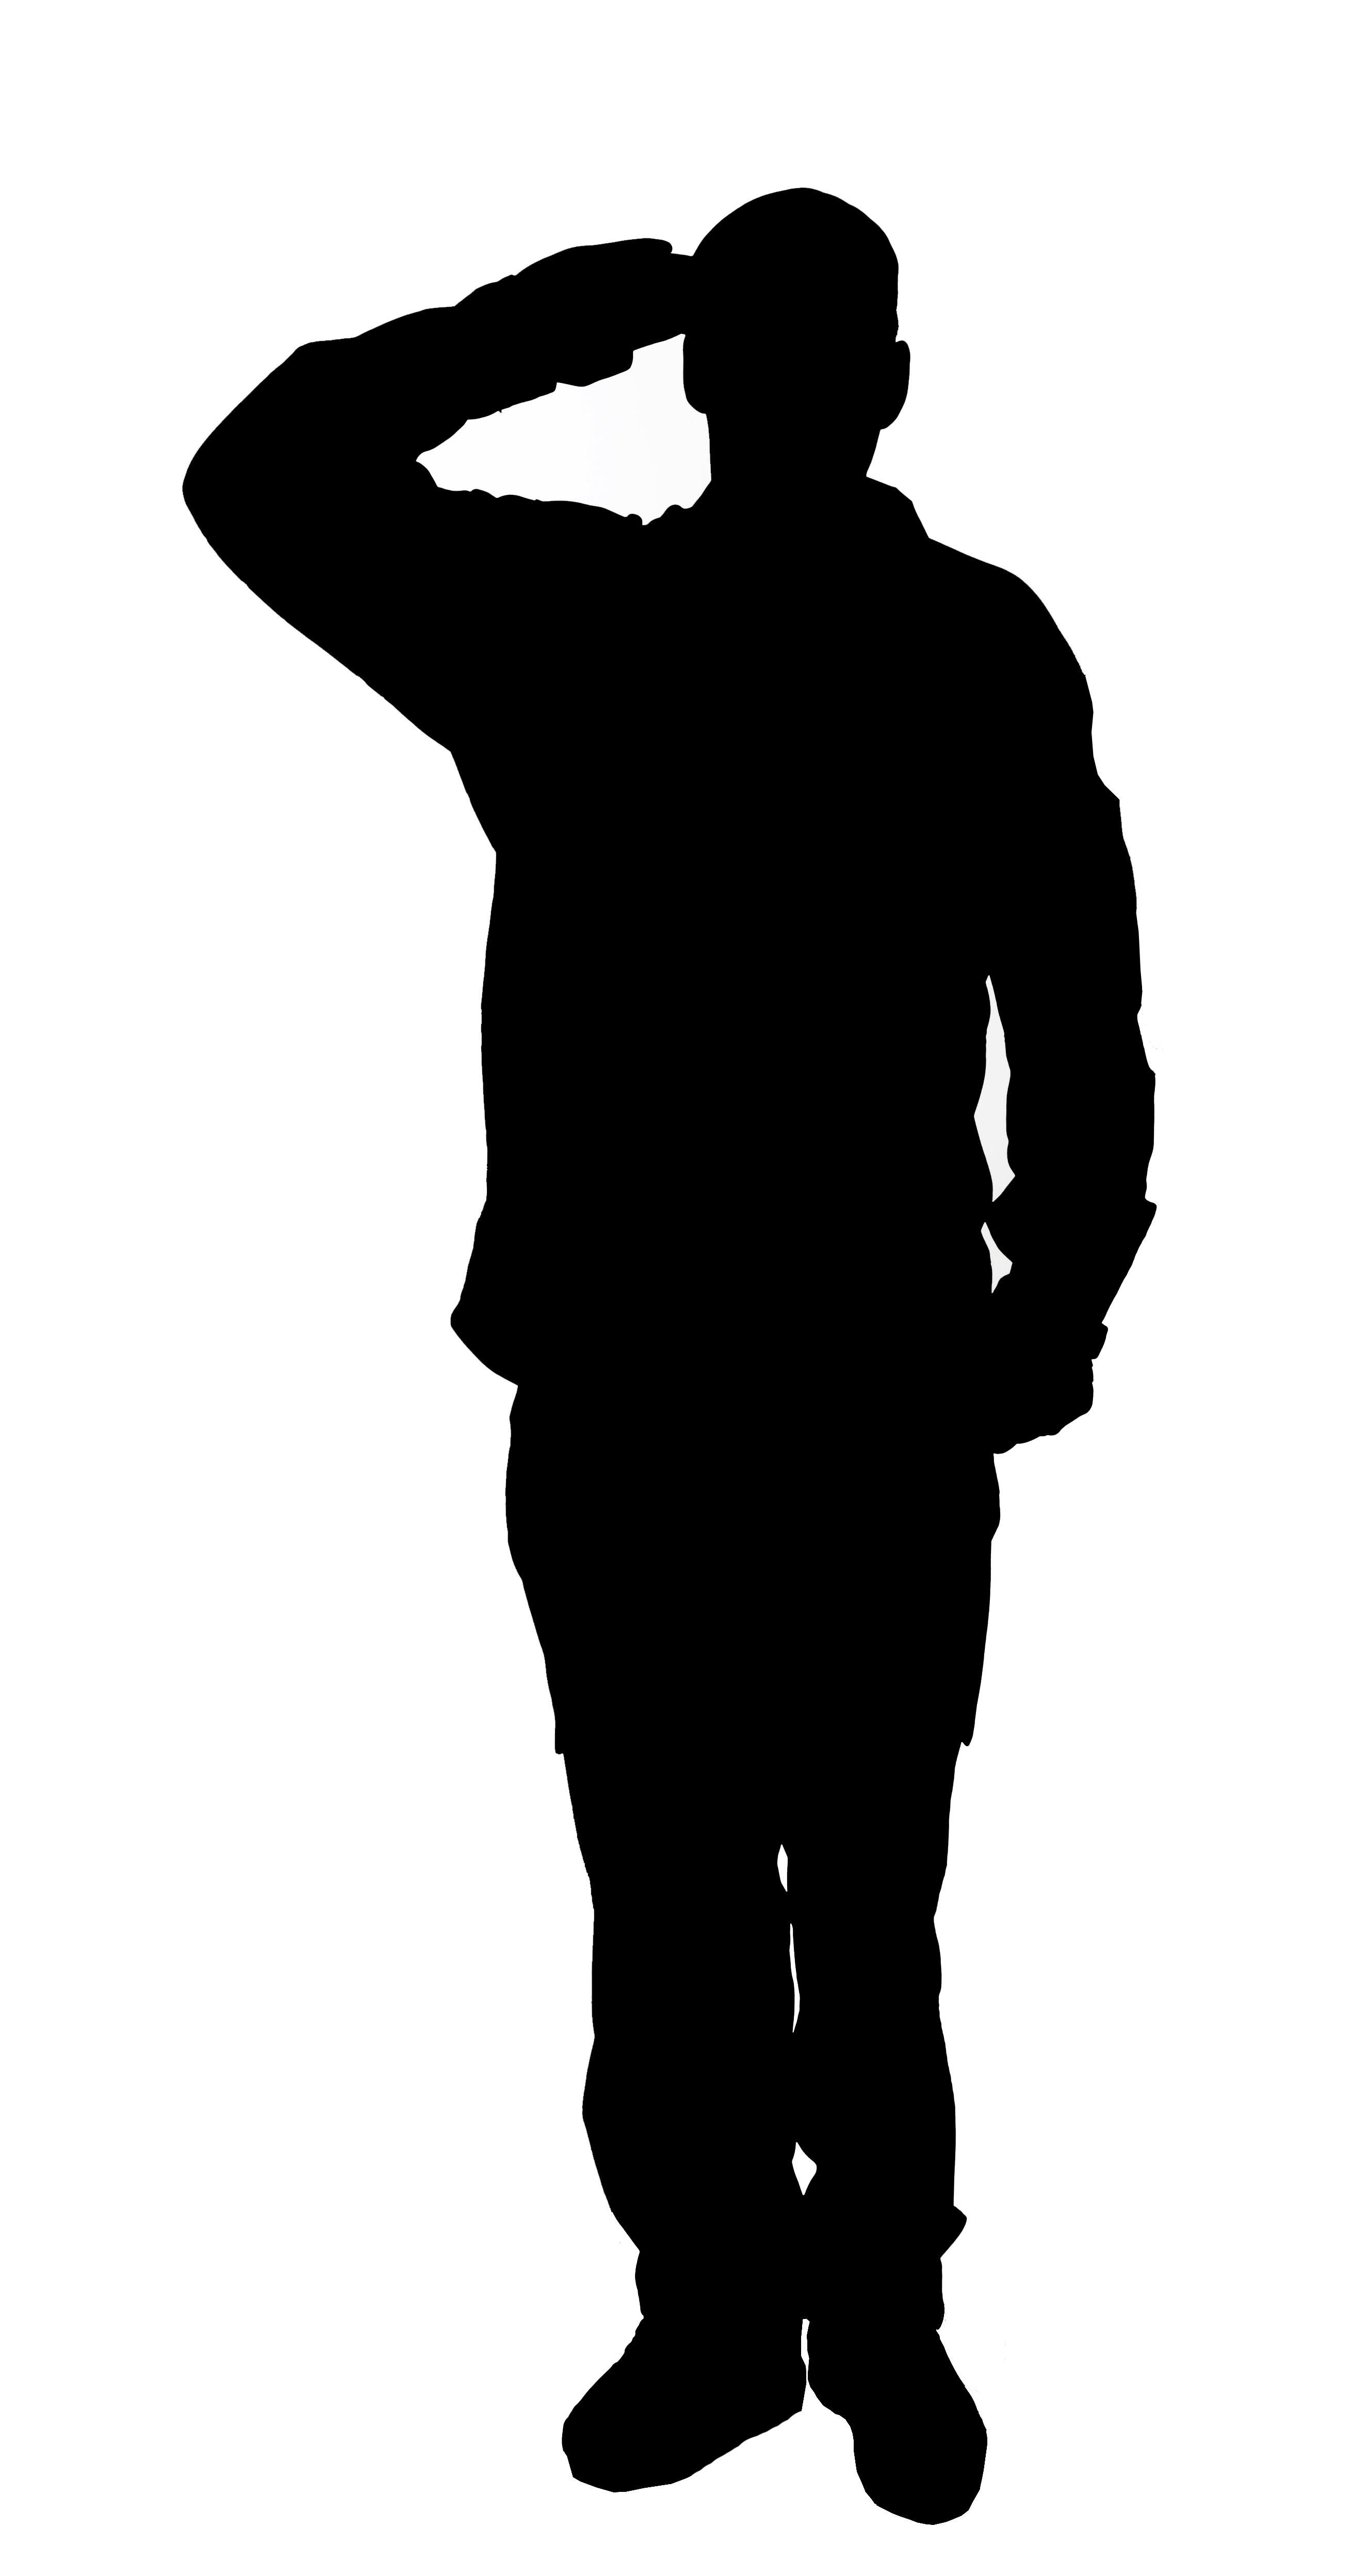 Soldier Silhouette - ClipArt Best